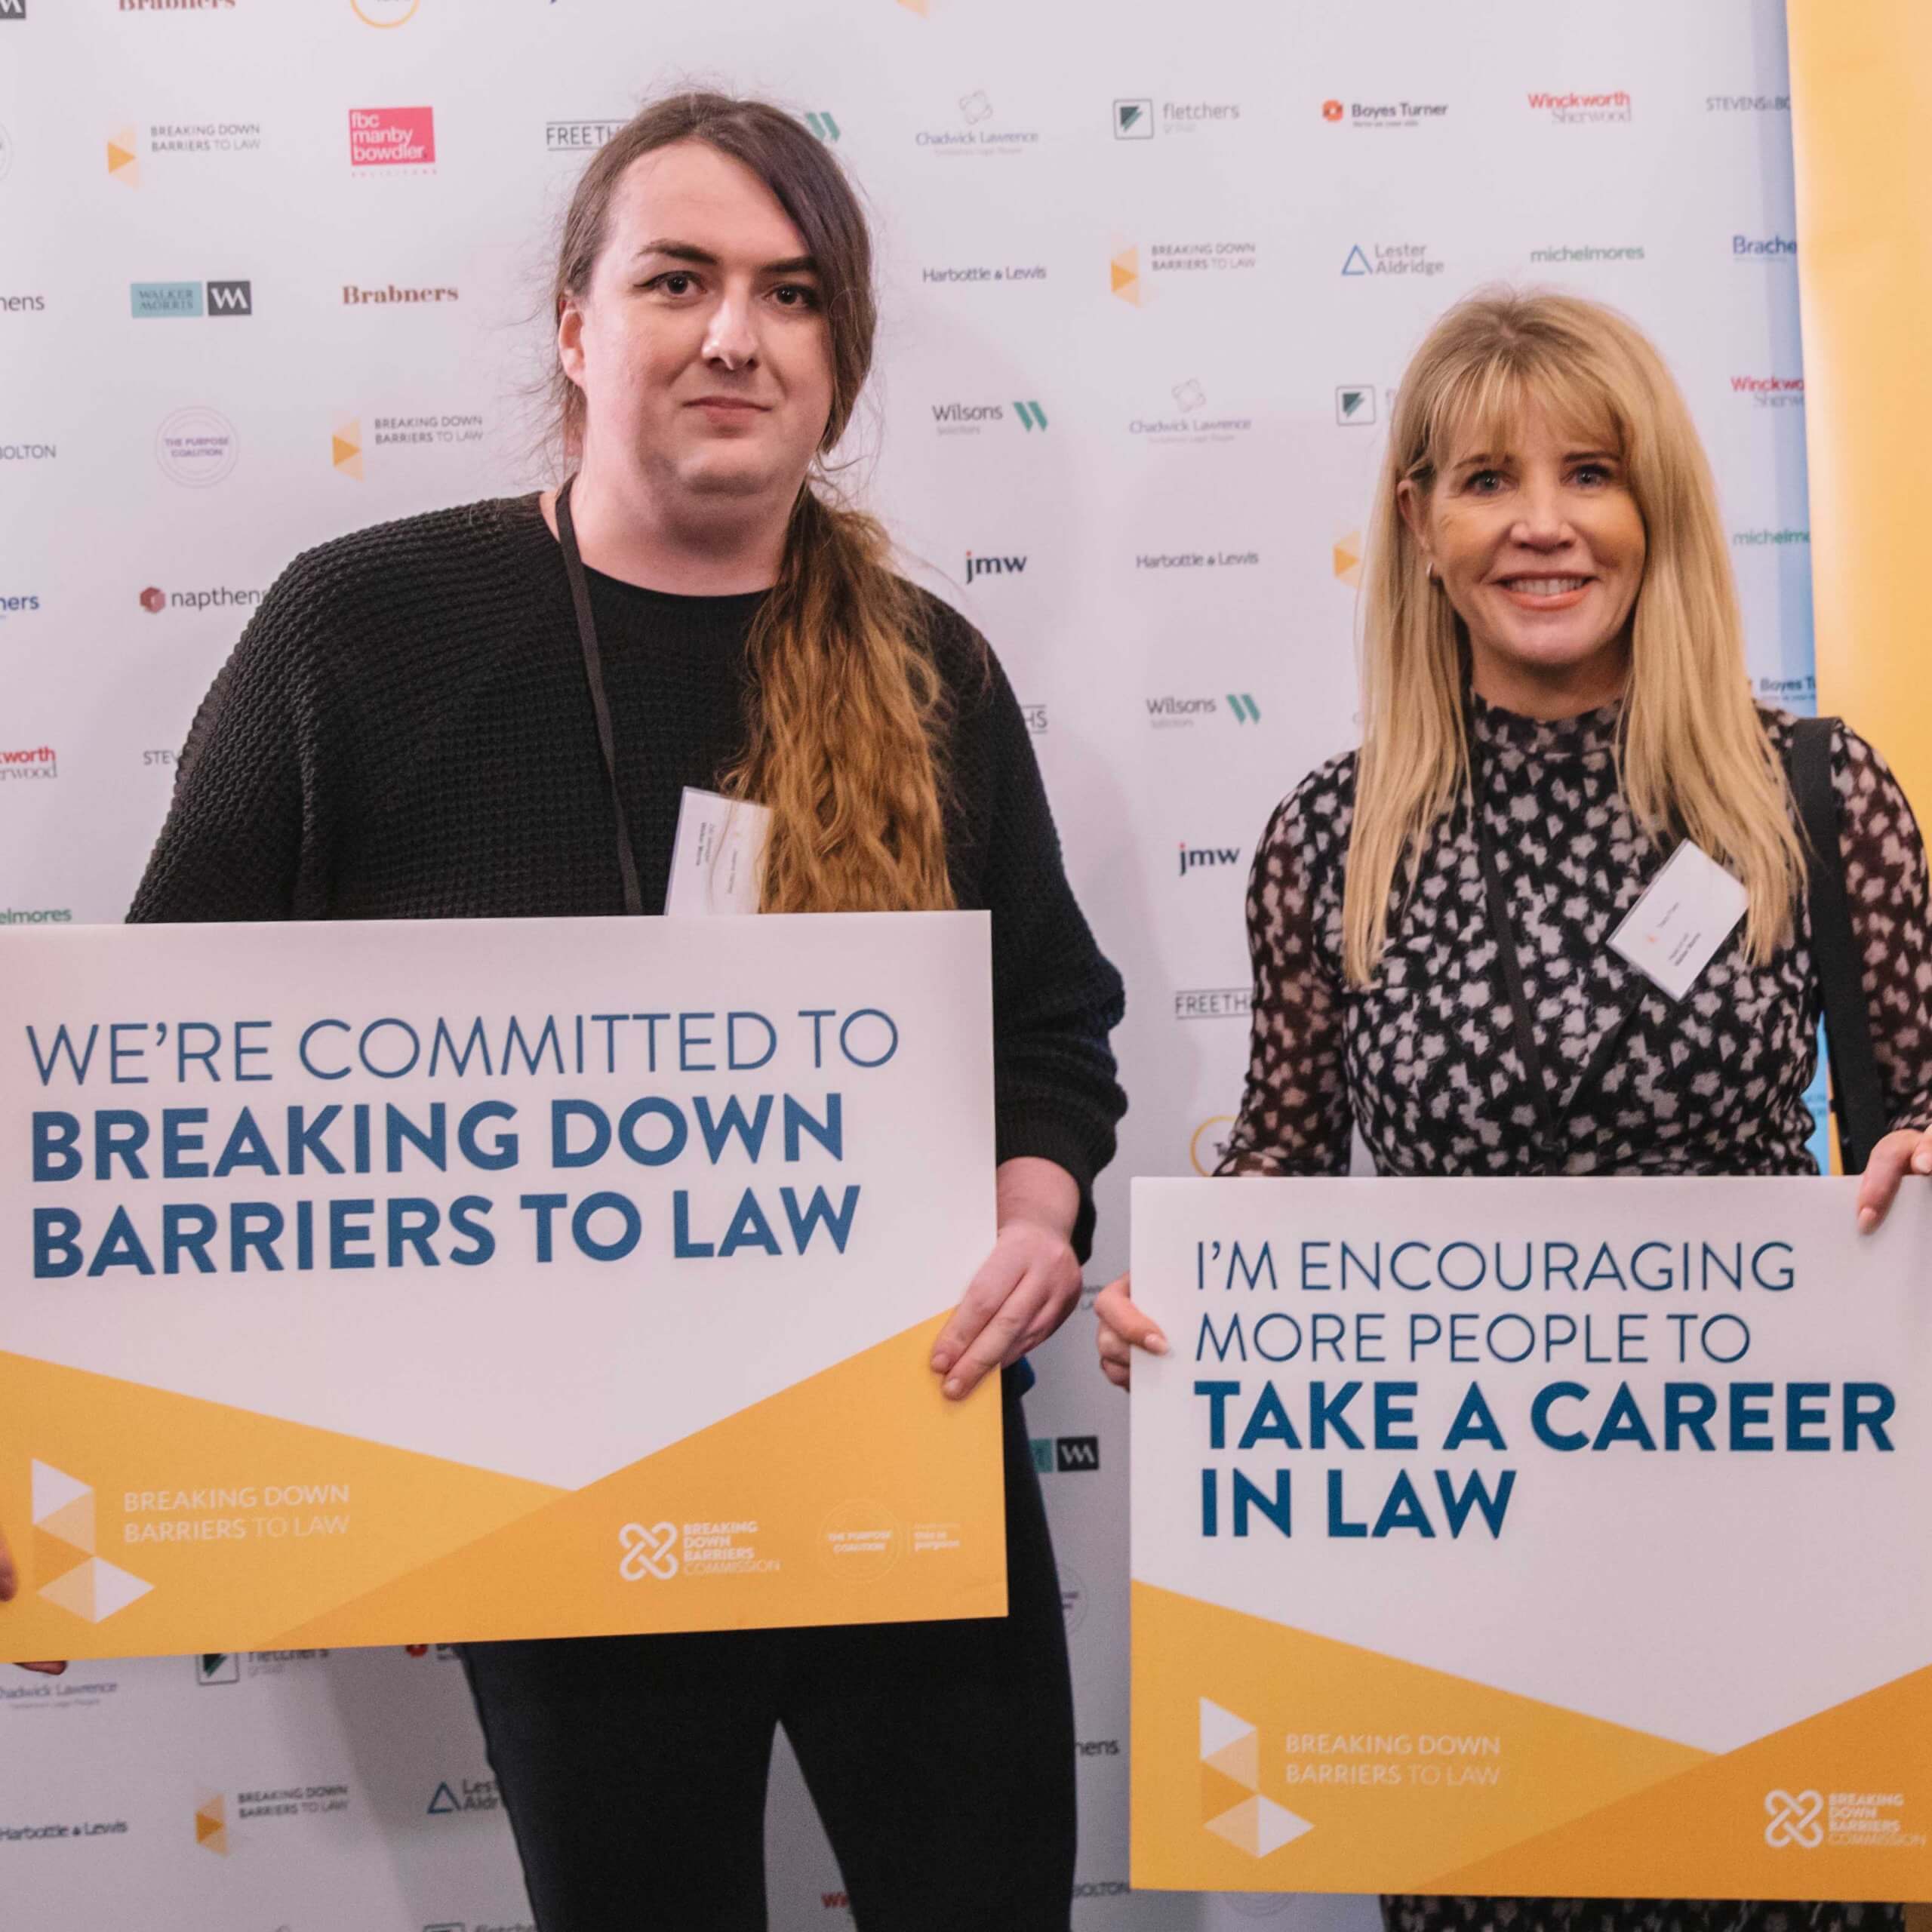 Walker Morris break down the barriers to law at the House of Commons